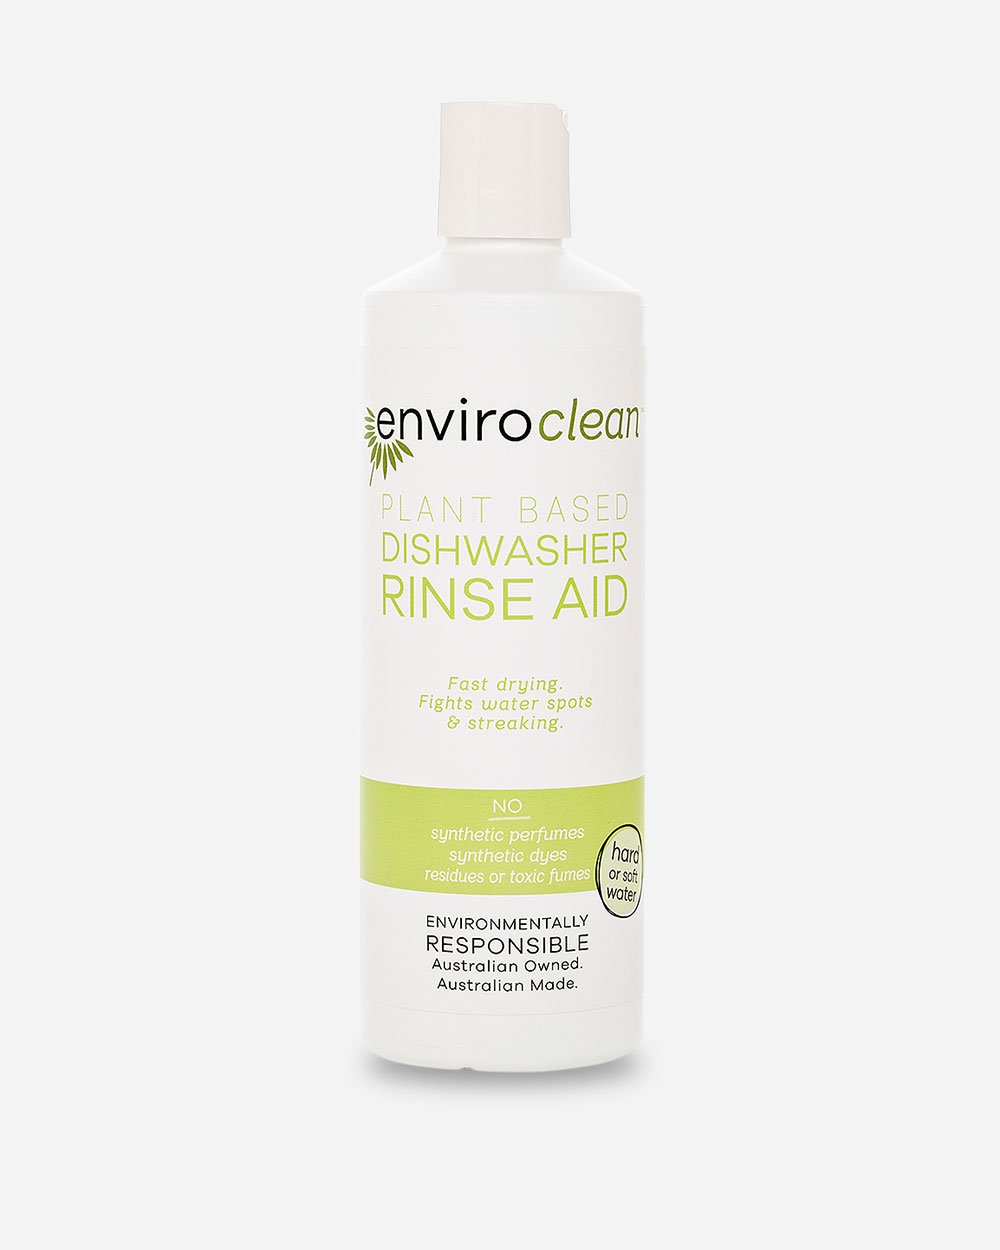 Rinse Aid from Enviroclean